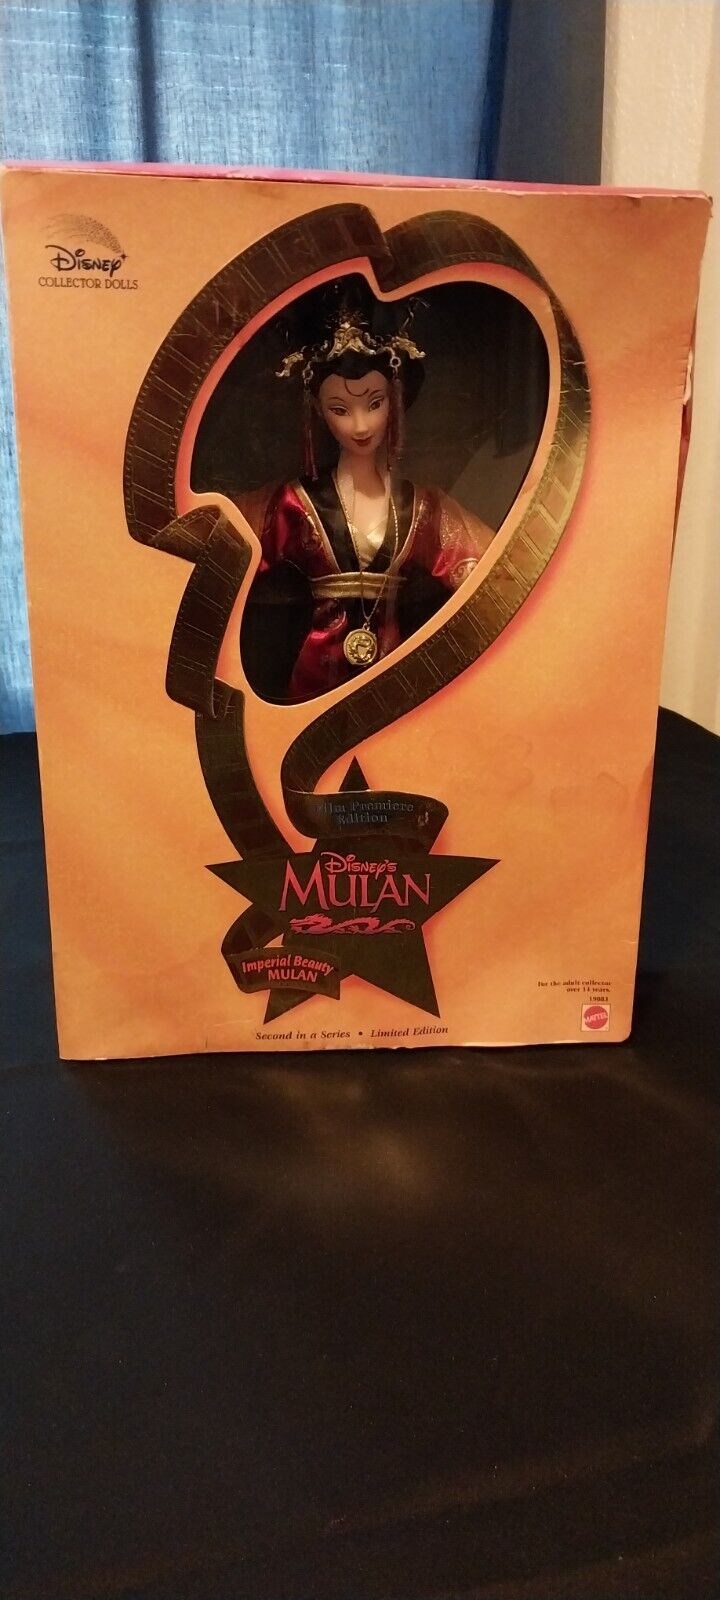 Disney’s Mulan Imperial Beauty Limited Edition Collectors Doll/Mattel SKU: 19083